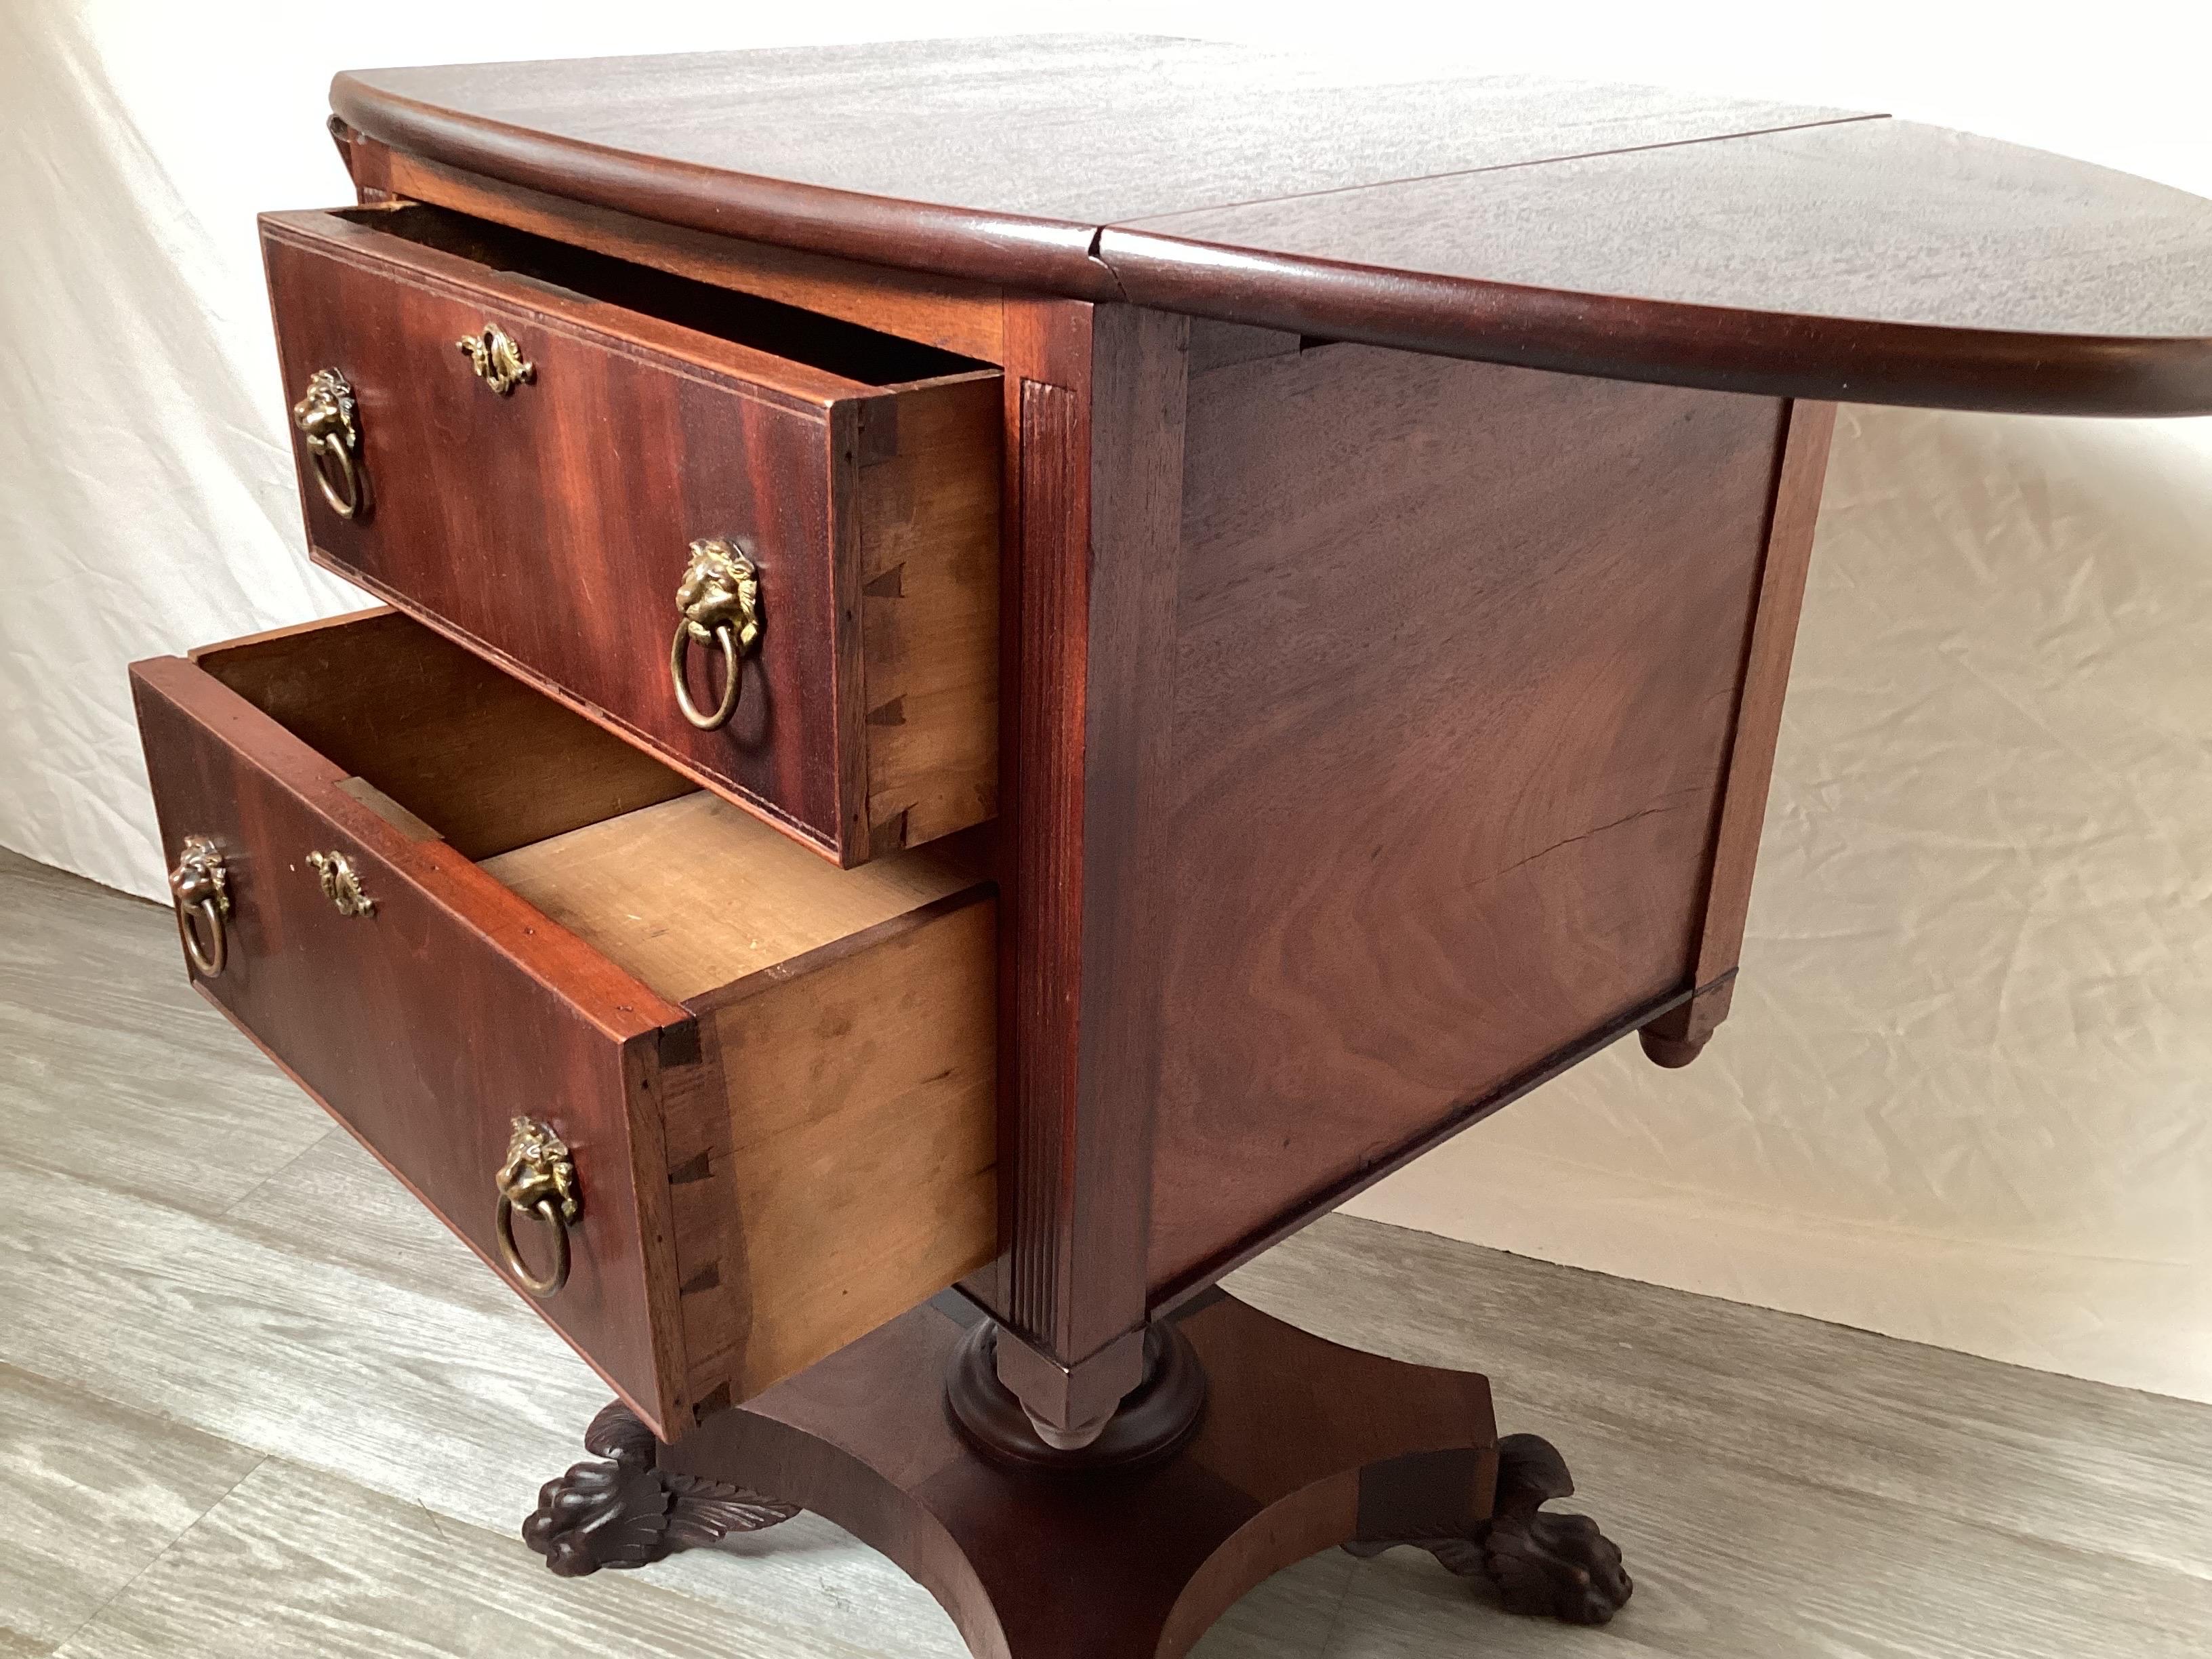 Hand-Crafted Mid 19th Century Mahogany Drop Sided Work Table